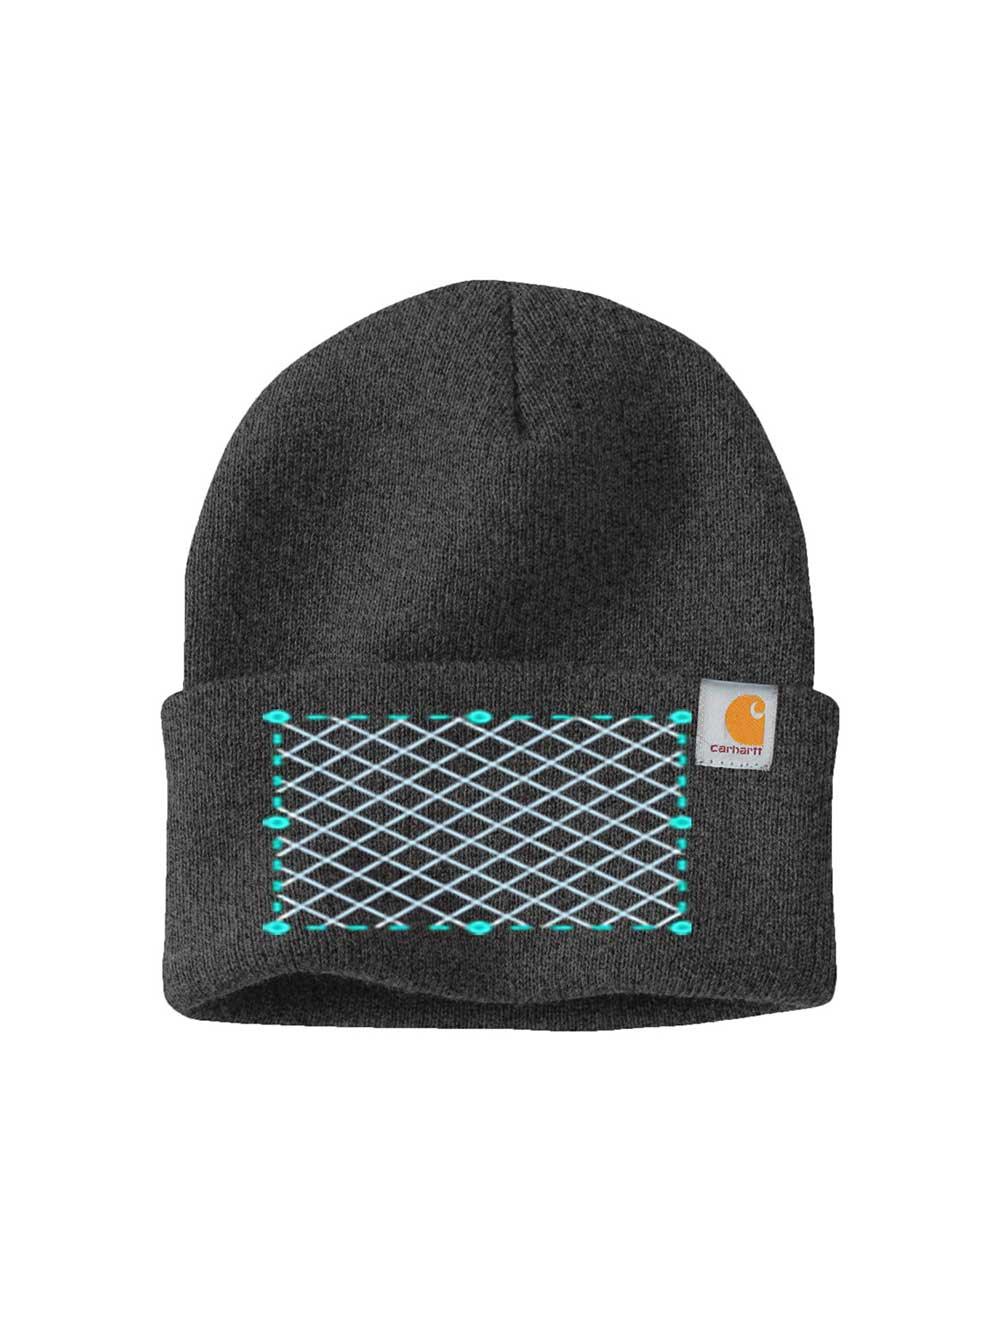 Embroidered Carhartt® Watch Cap 2.0 - Constantly Create Shop